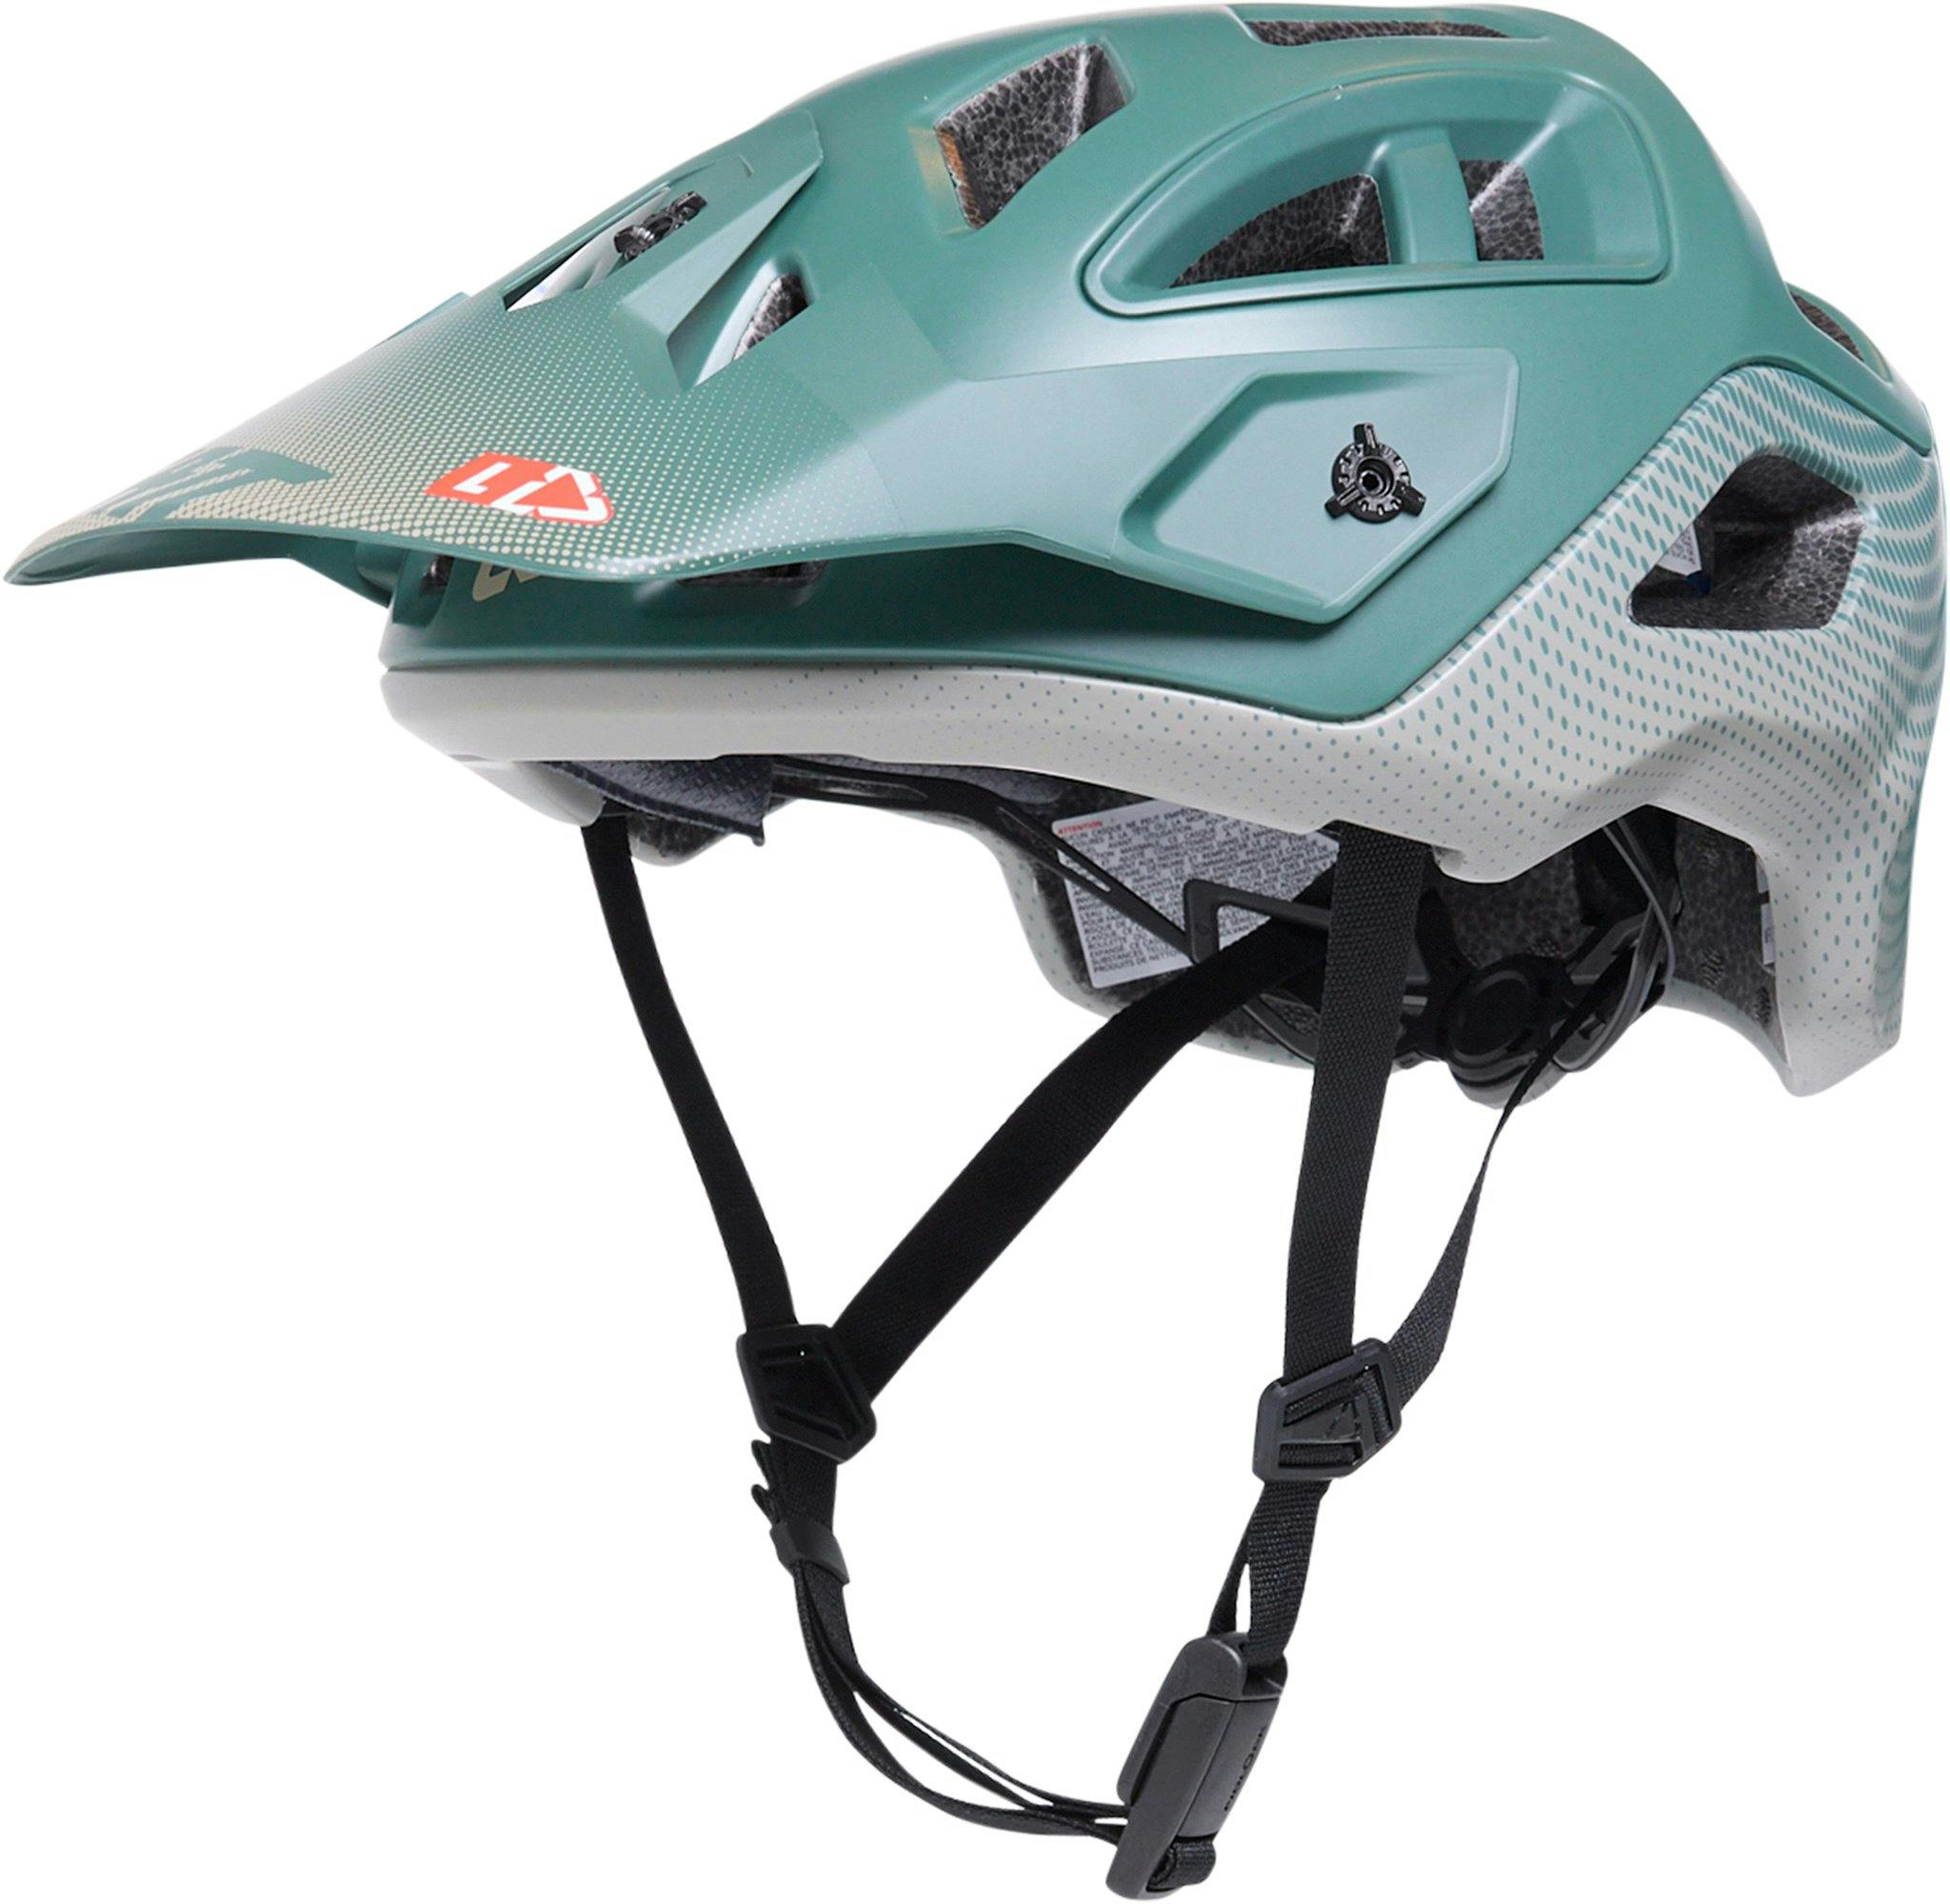 Product image for All Mountain 3.0 MTB Helmet